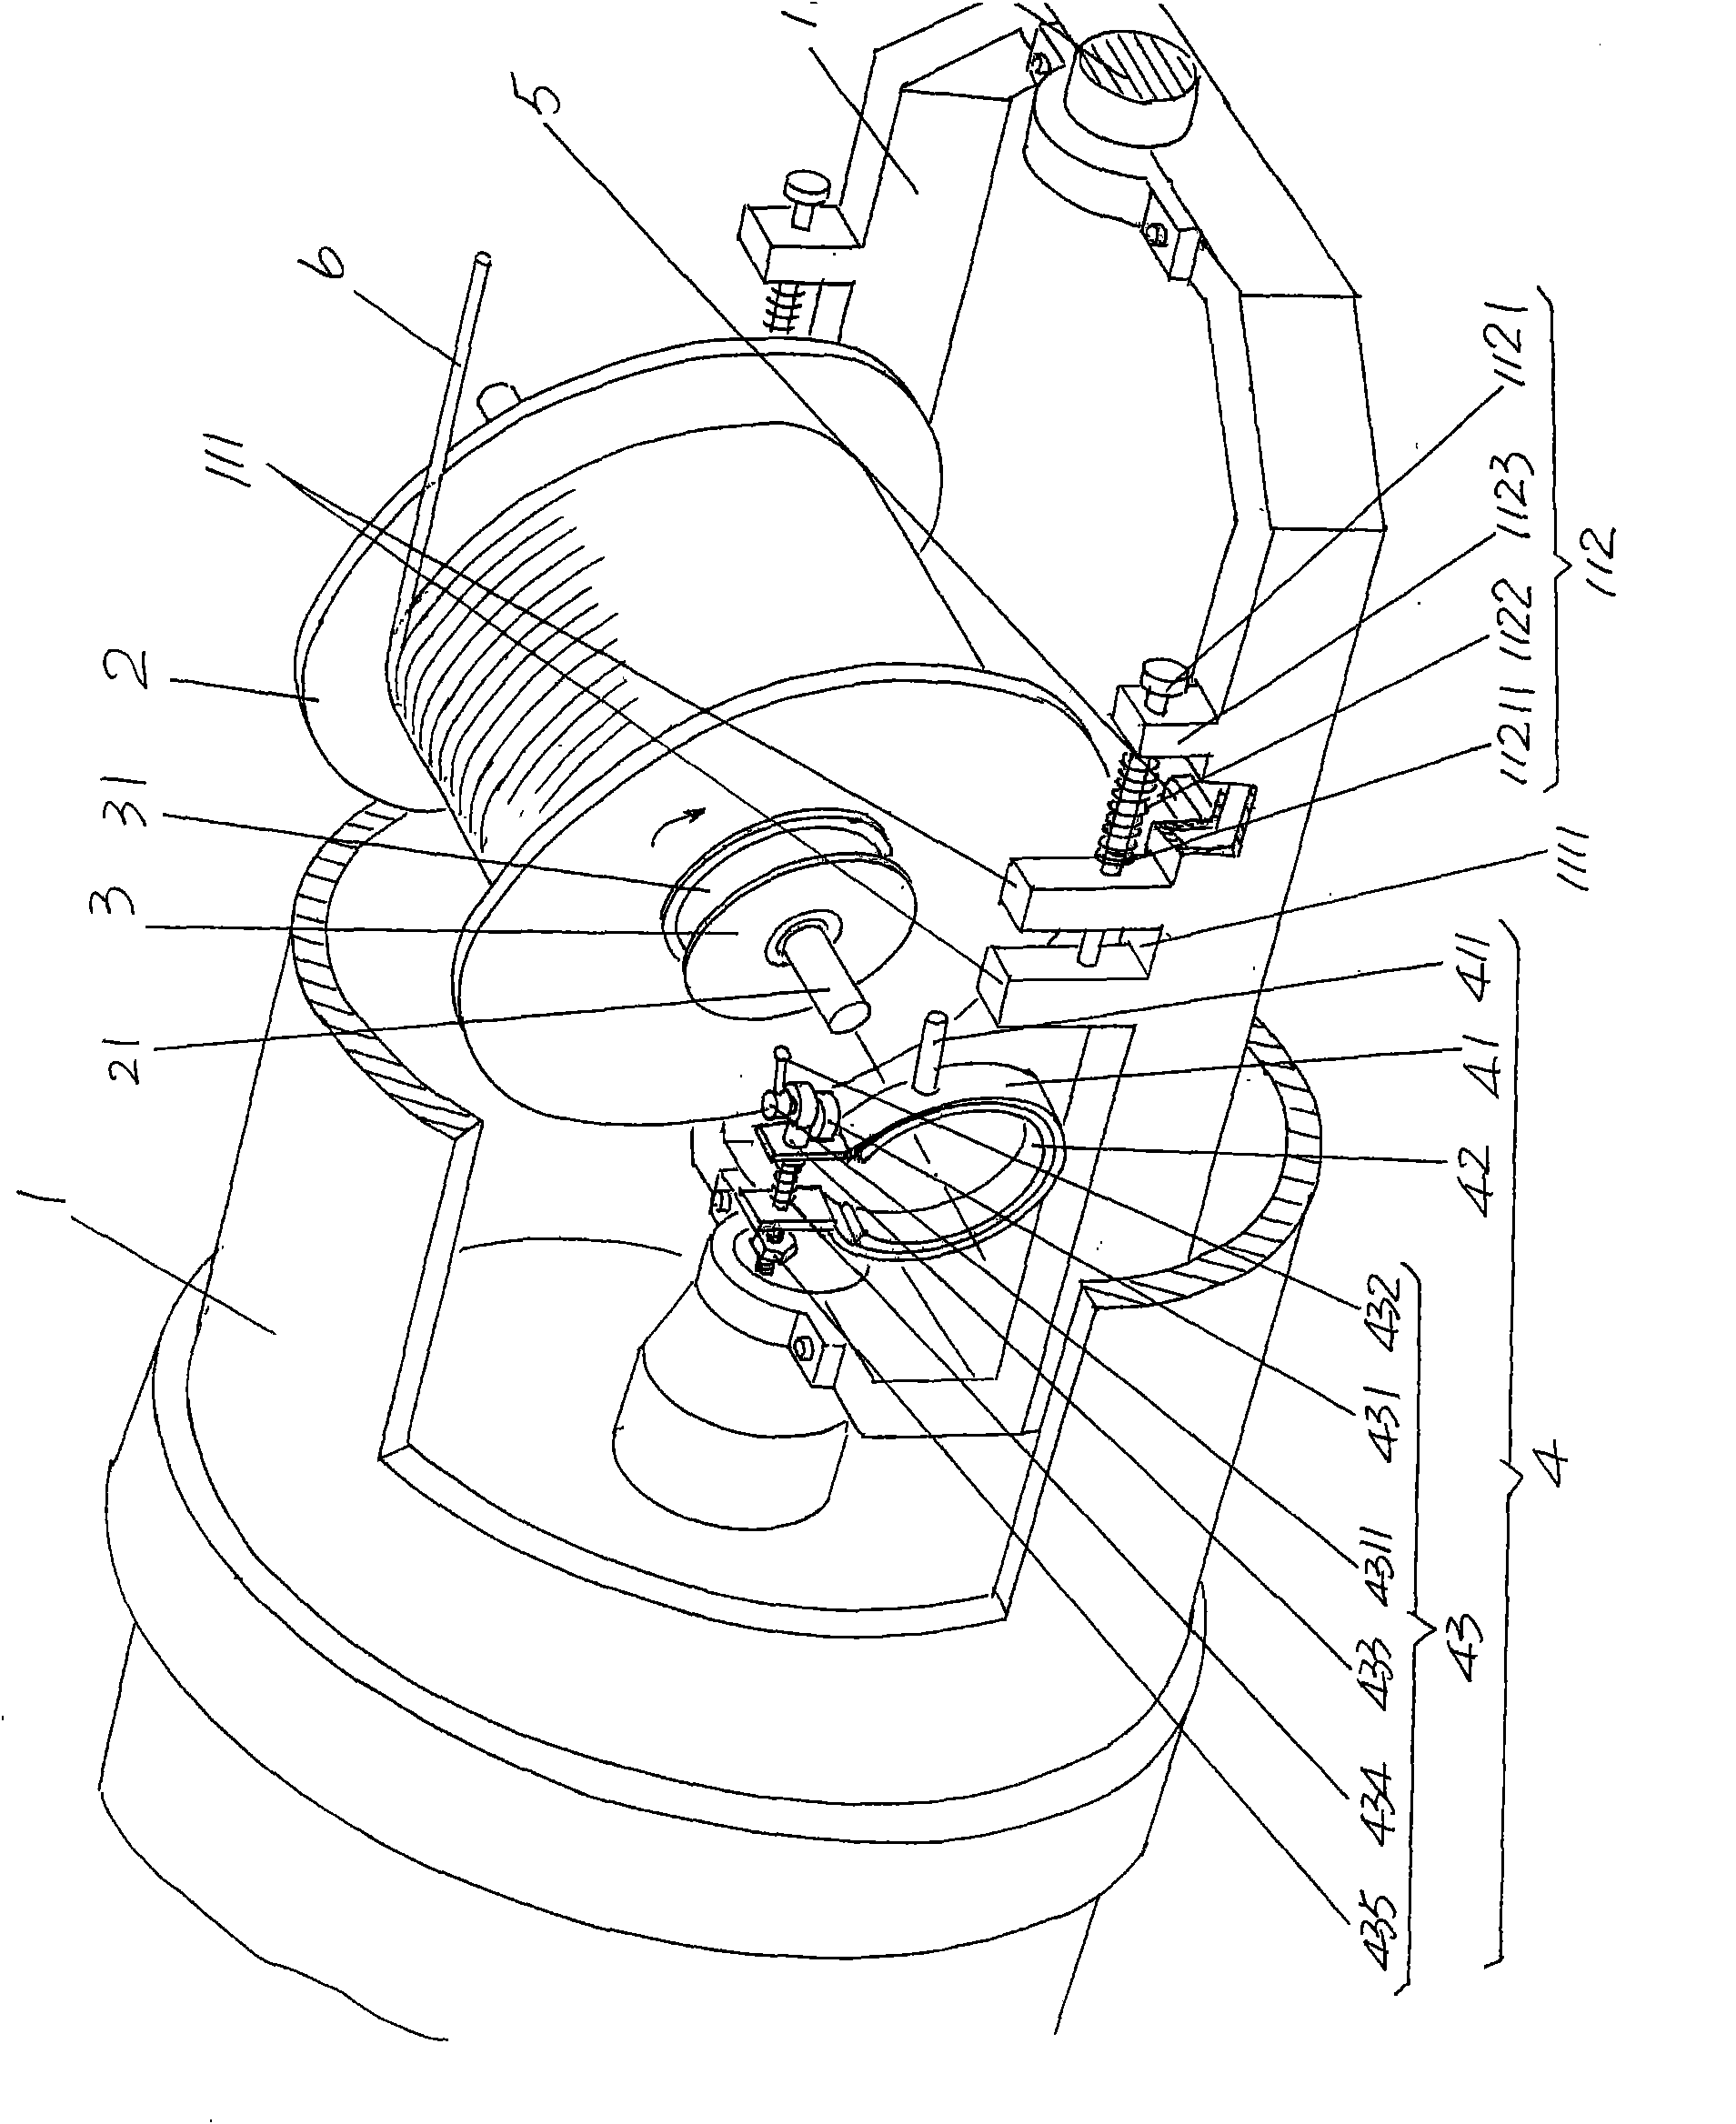 Conducting wire tension adjusting device of stranding machine